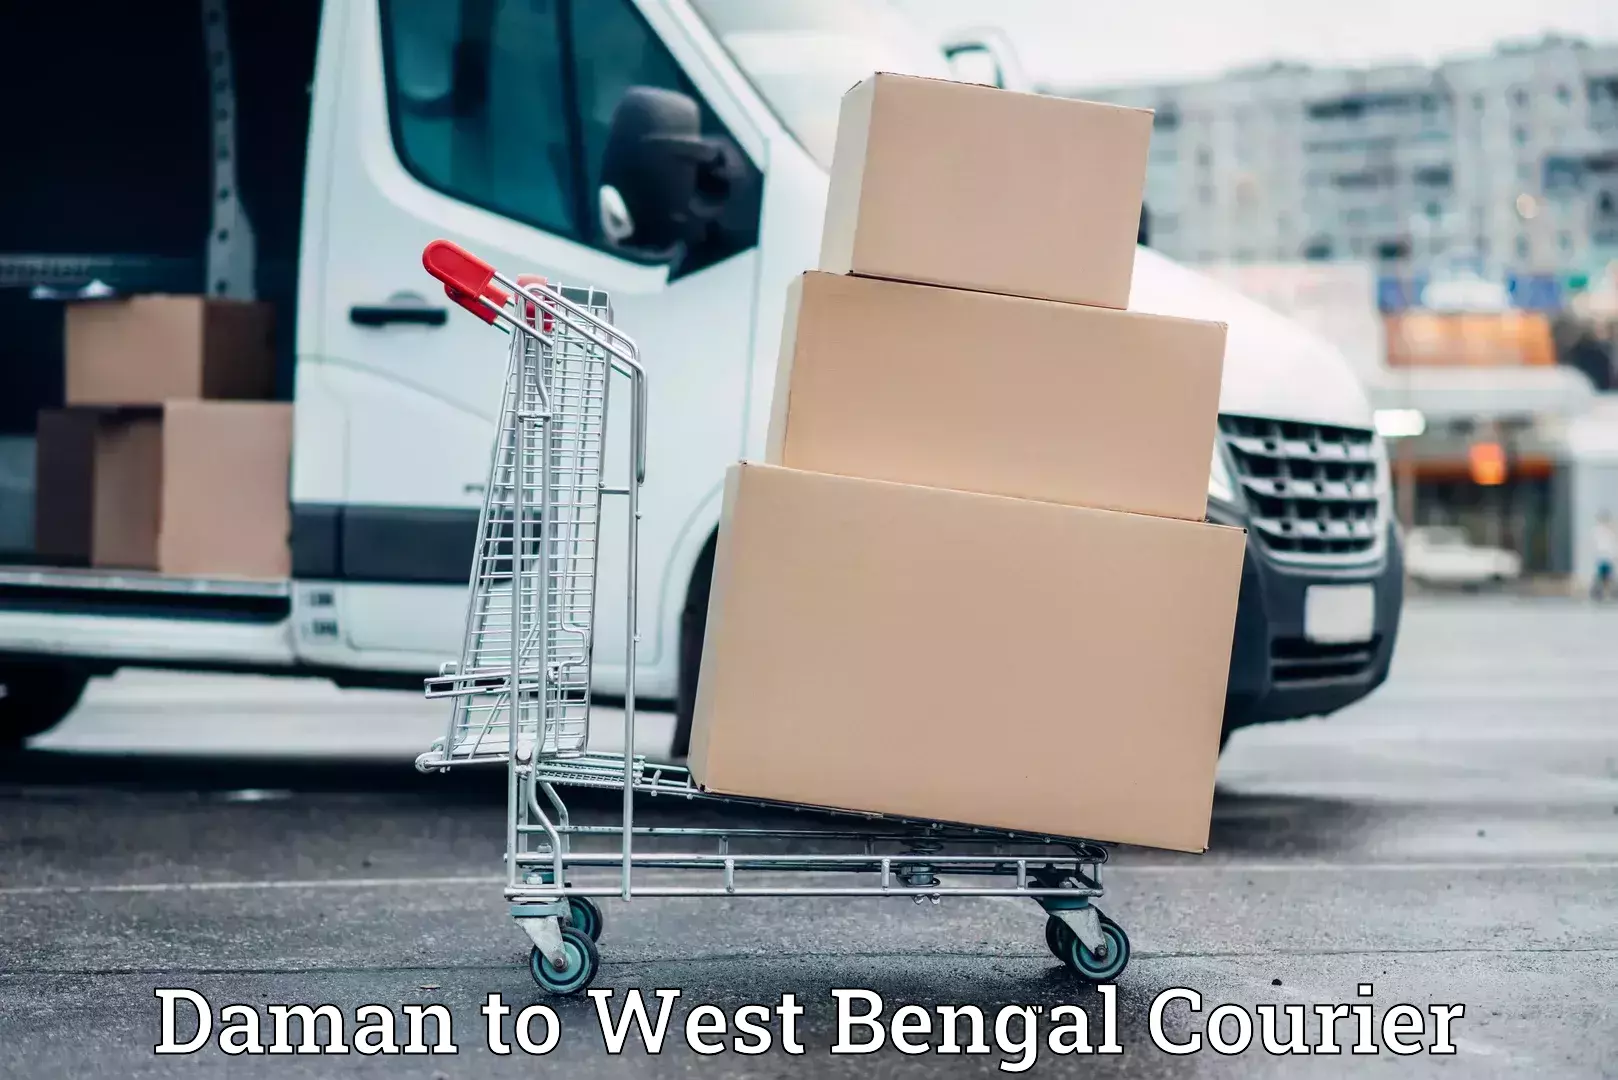 Furniture transport specialists Daman to West Bengal